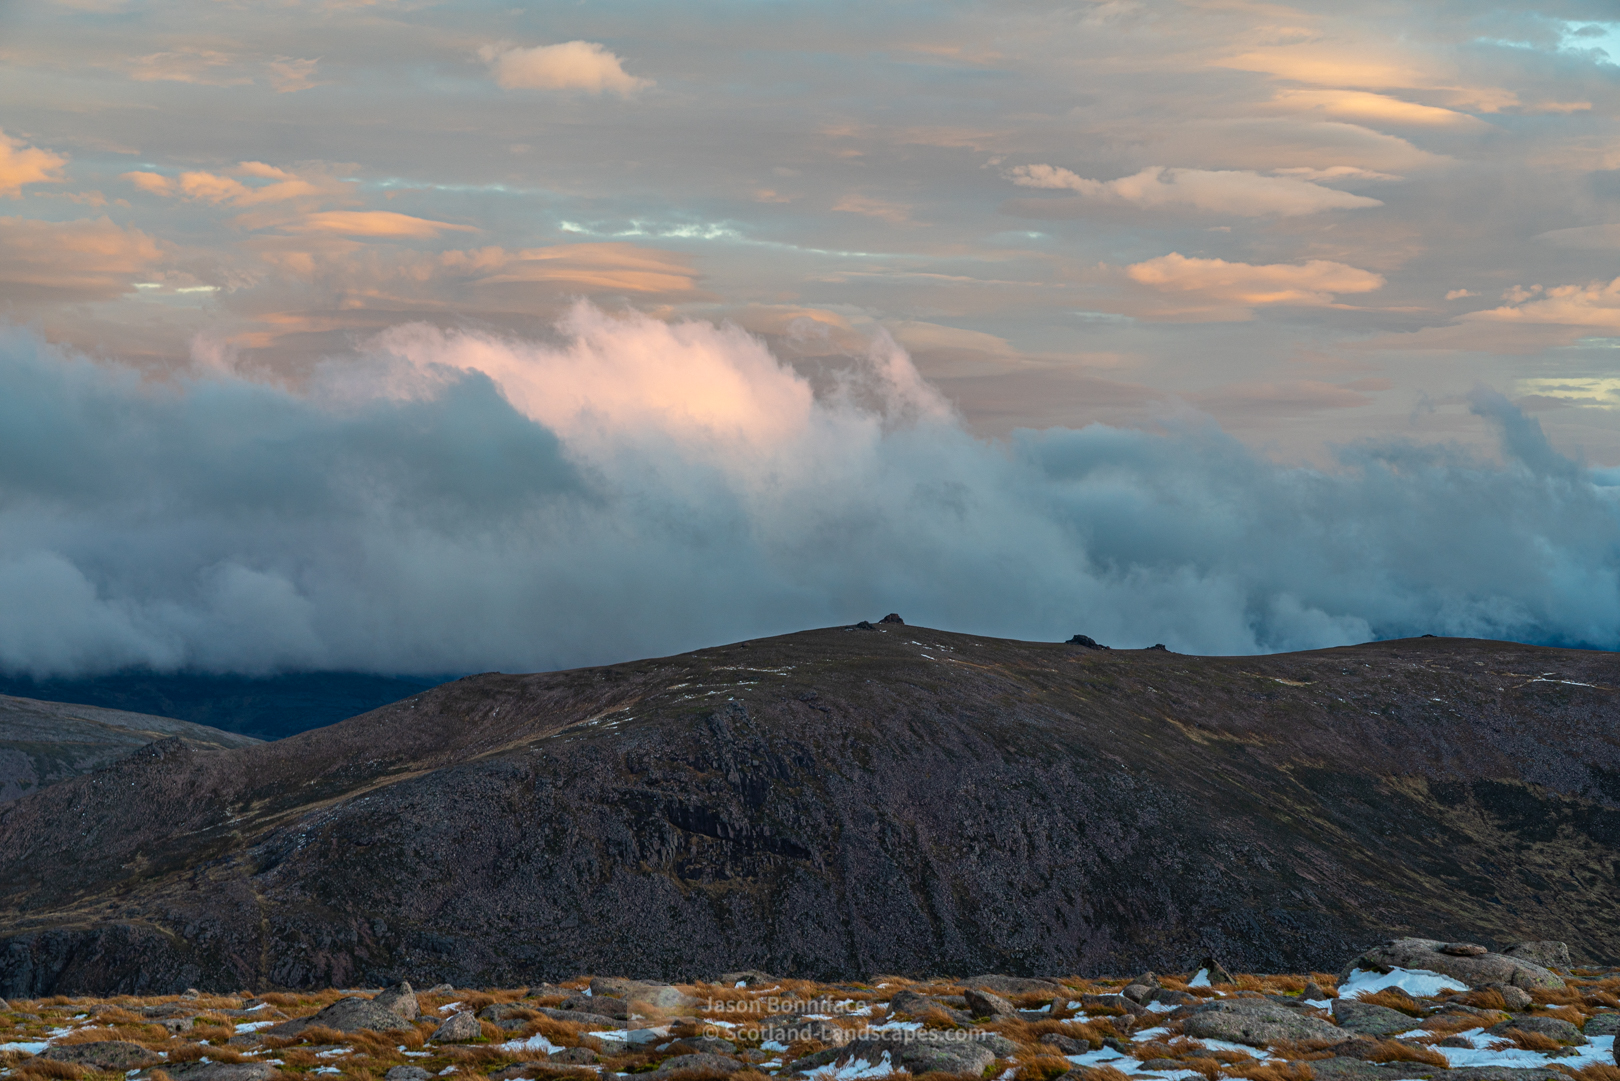 The summit tors of Beinn Mheadhoin from the summit of Cairngorm